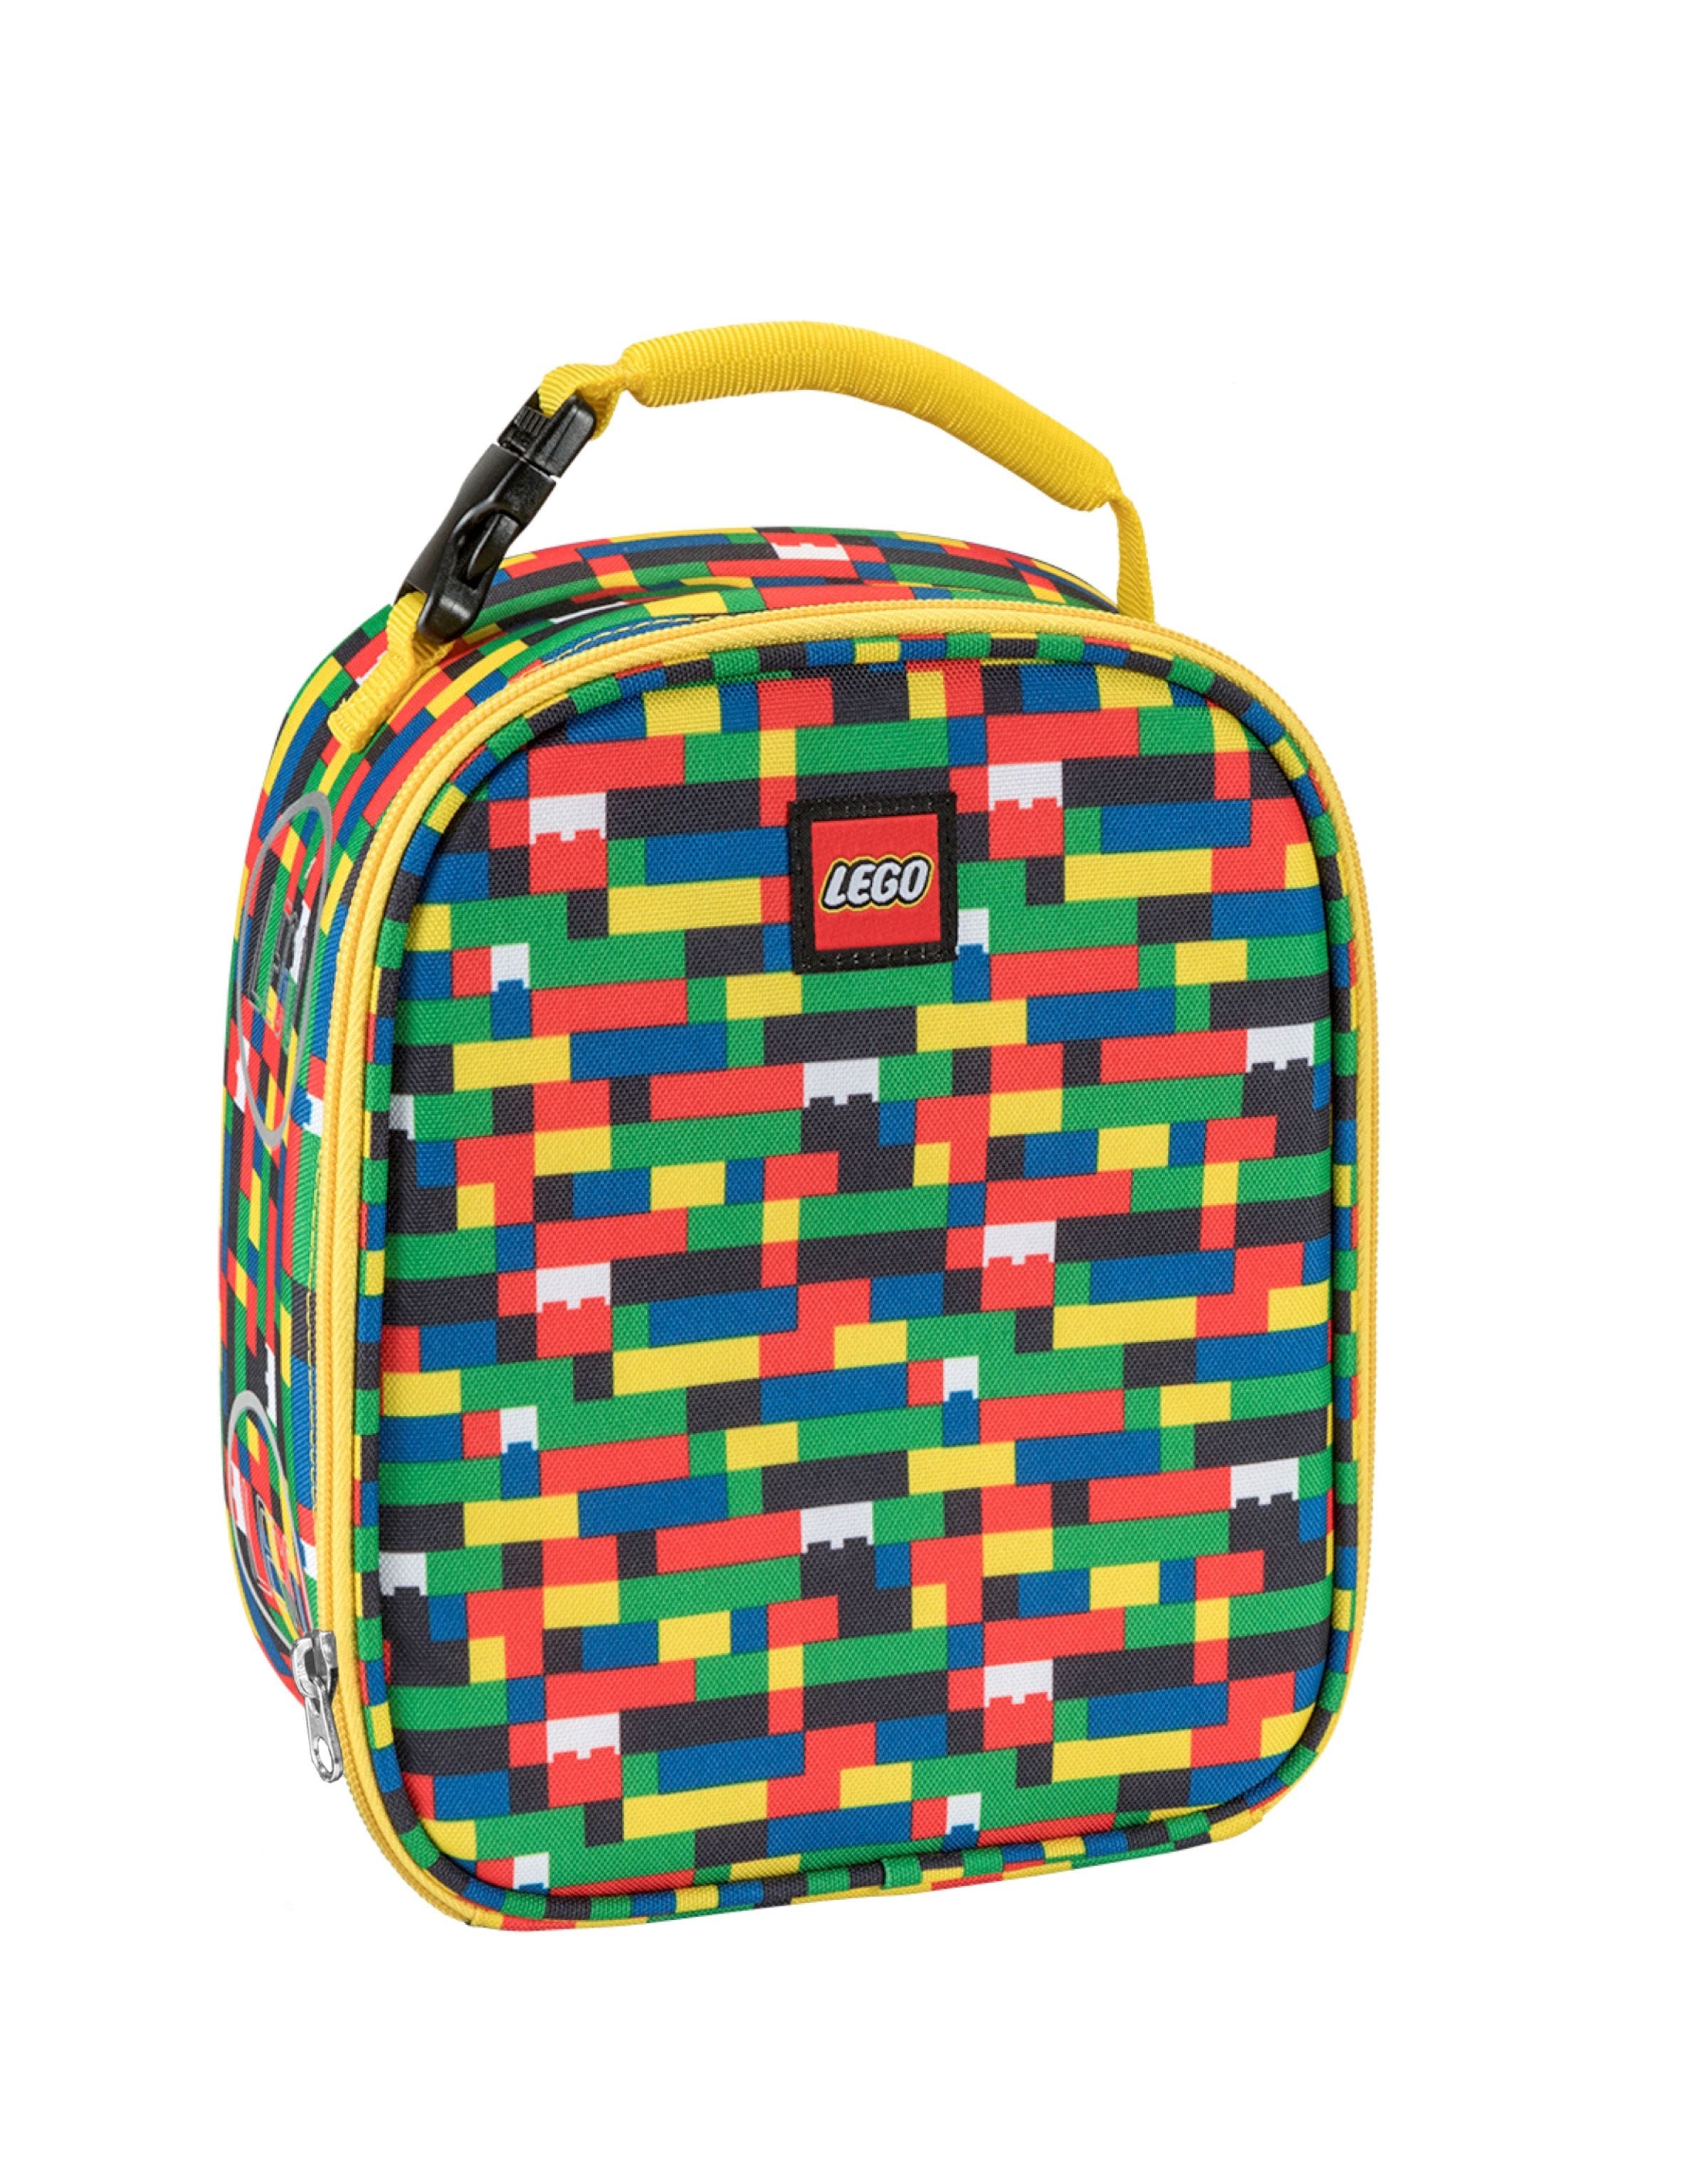 Heritage Classic Lunch Bag - Brick Wall